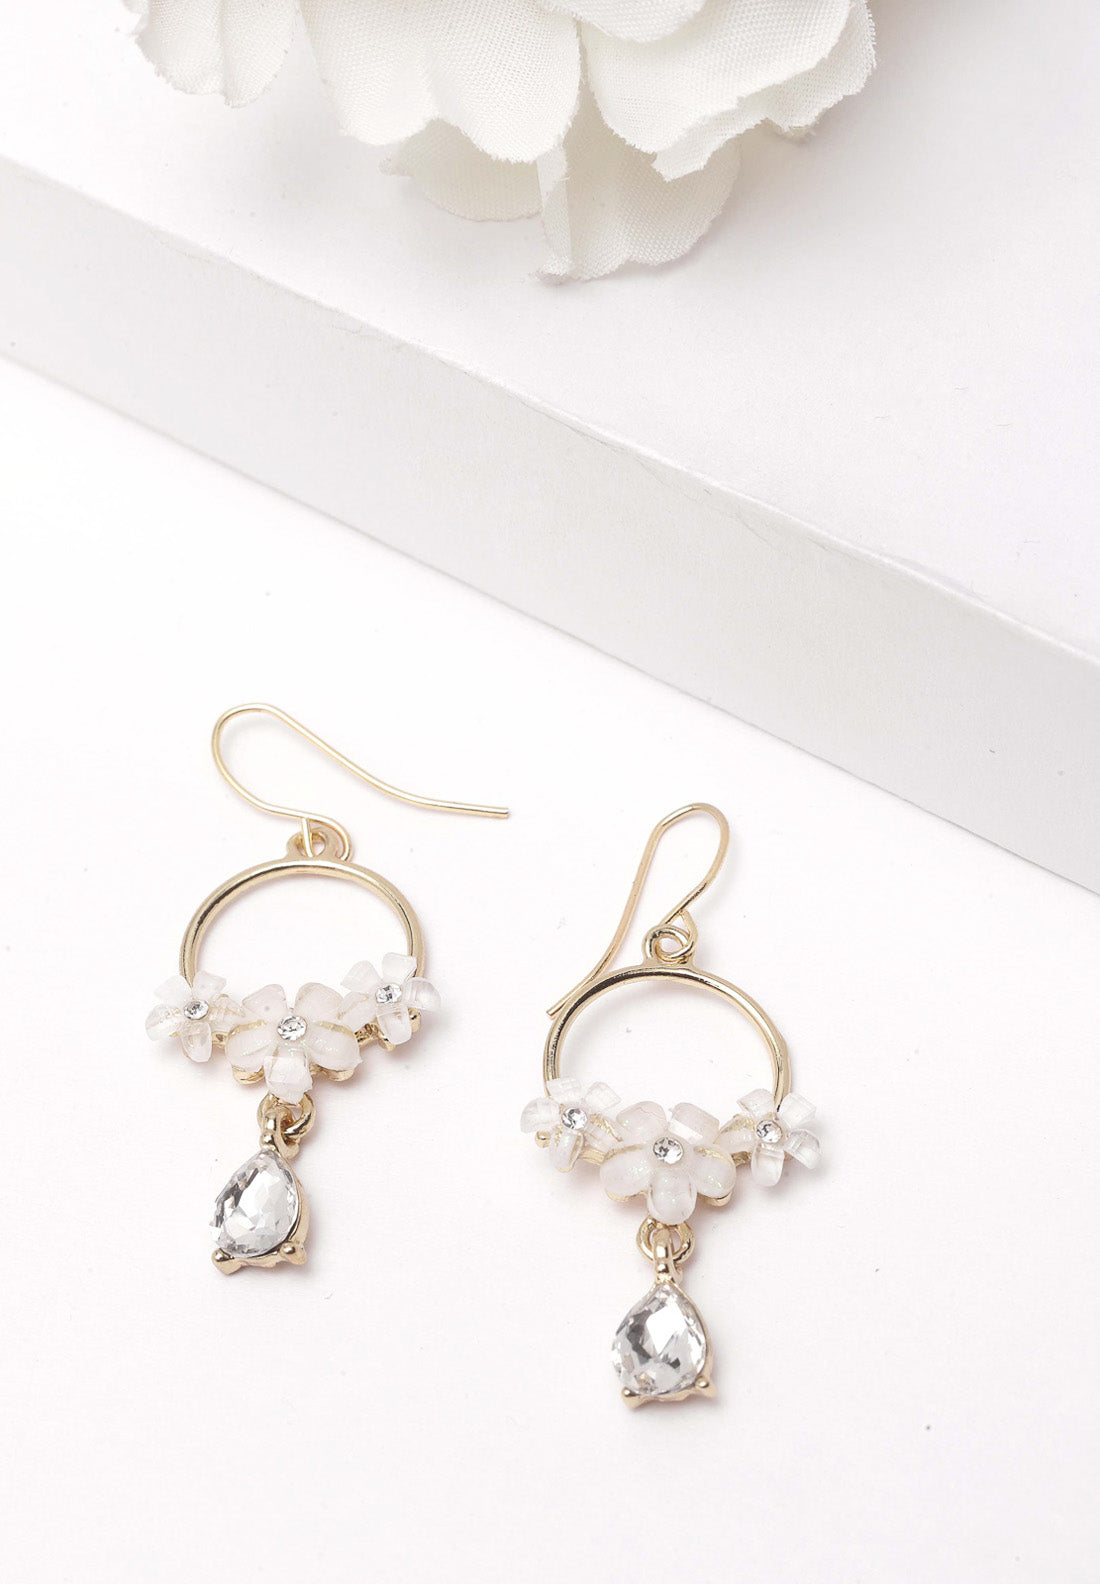 Gold & White Floral Crystal Earrings